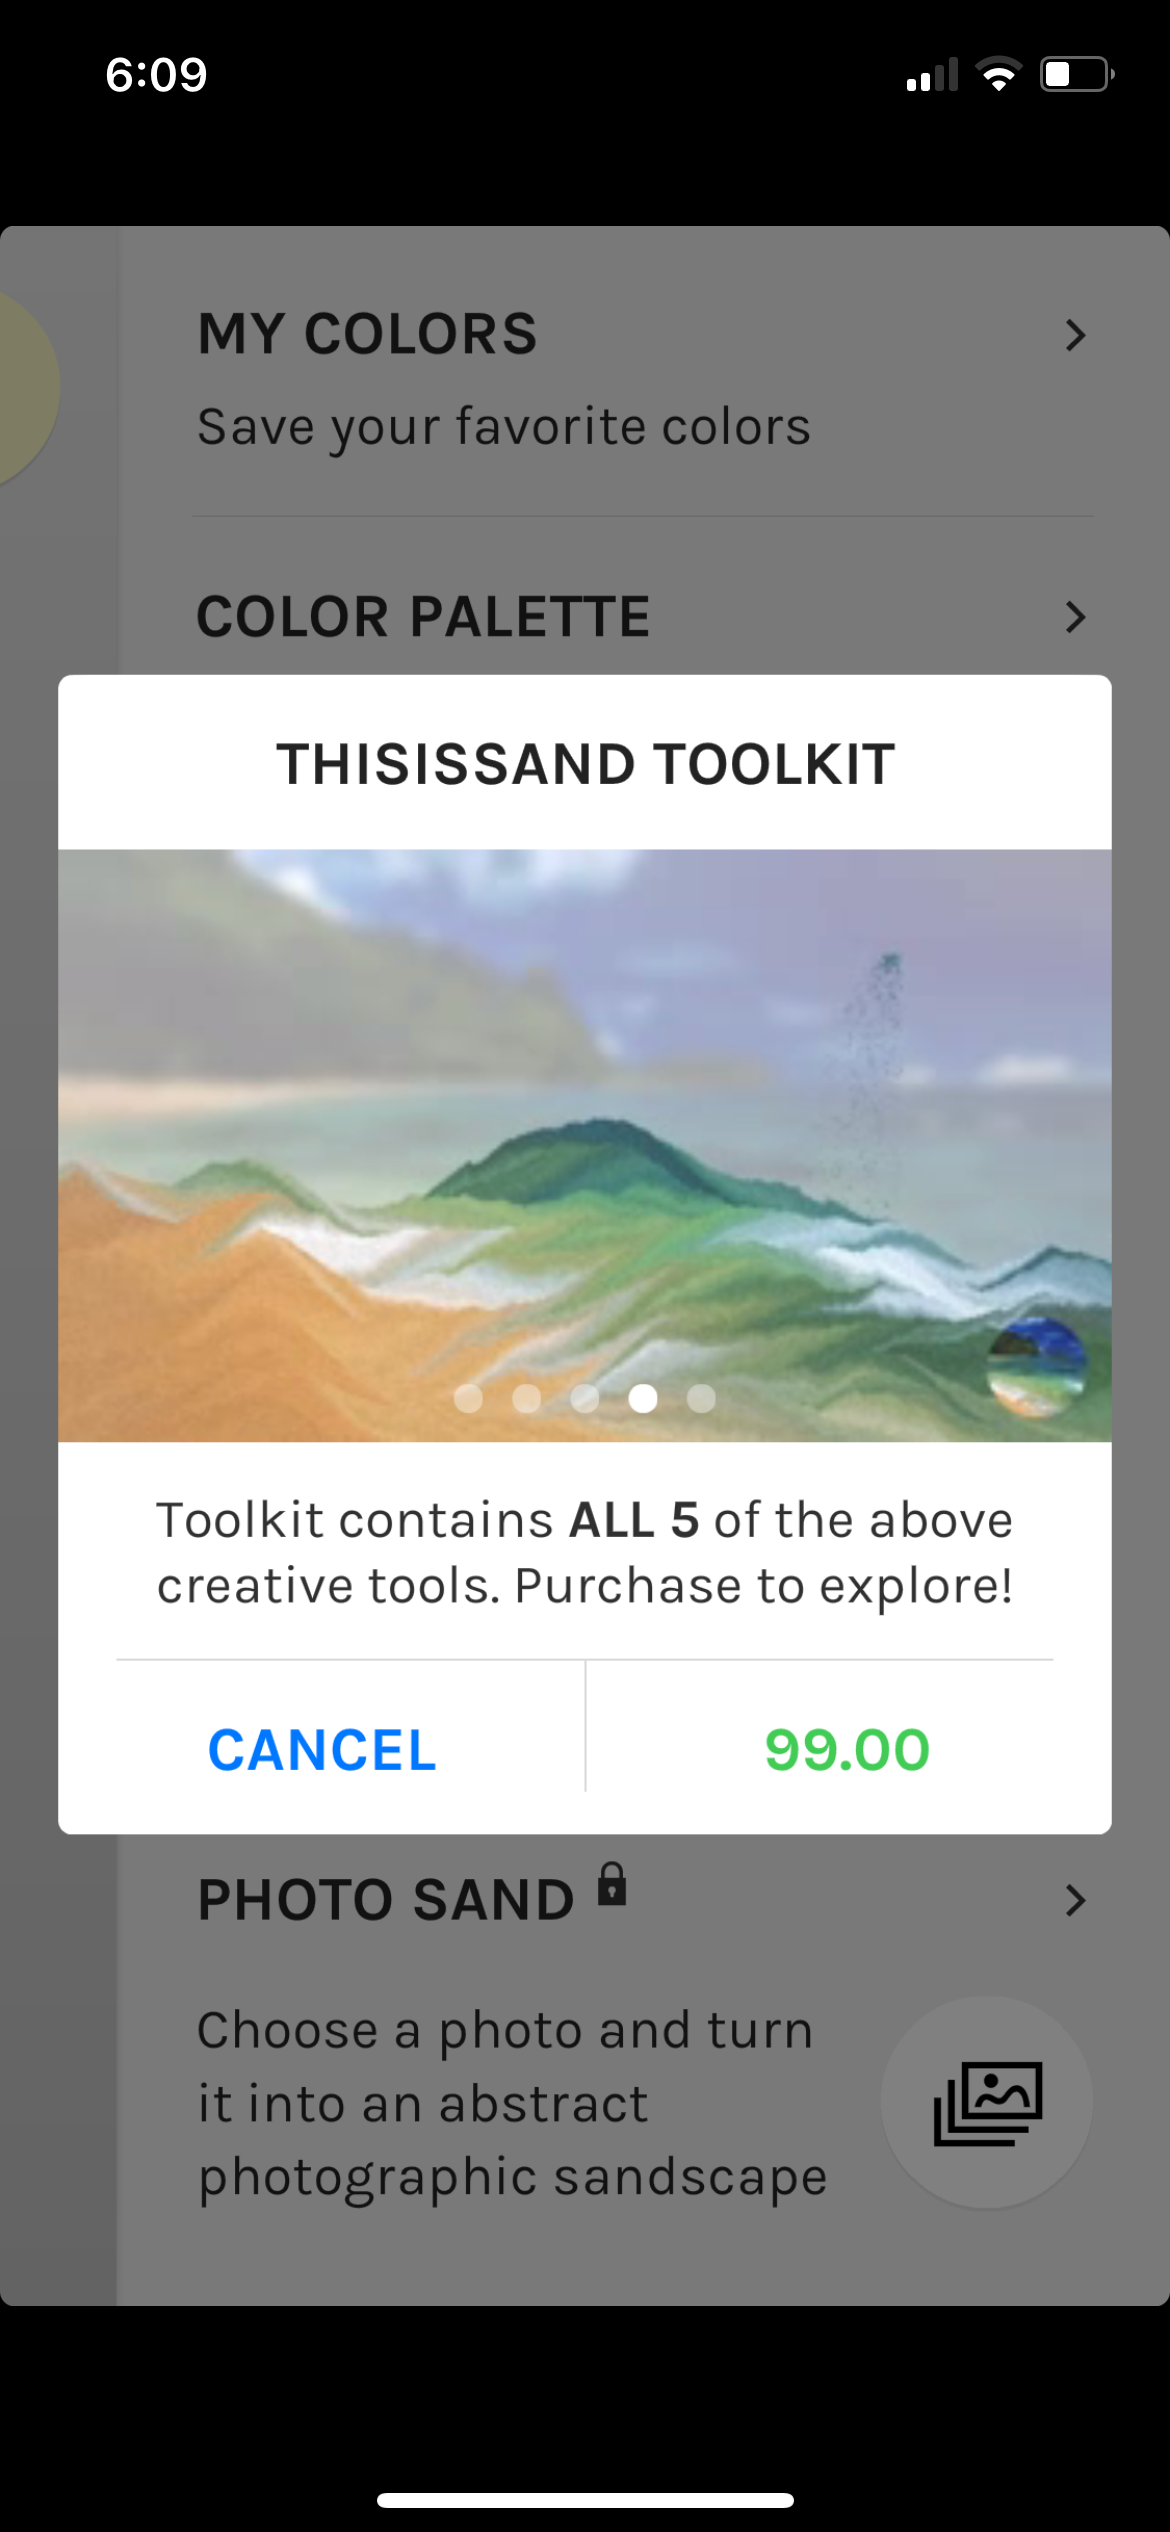 Thisissand Toolkit